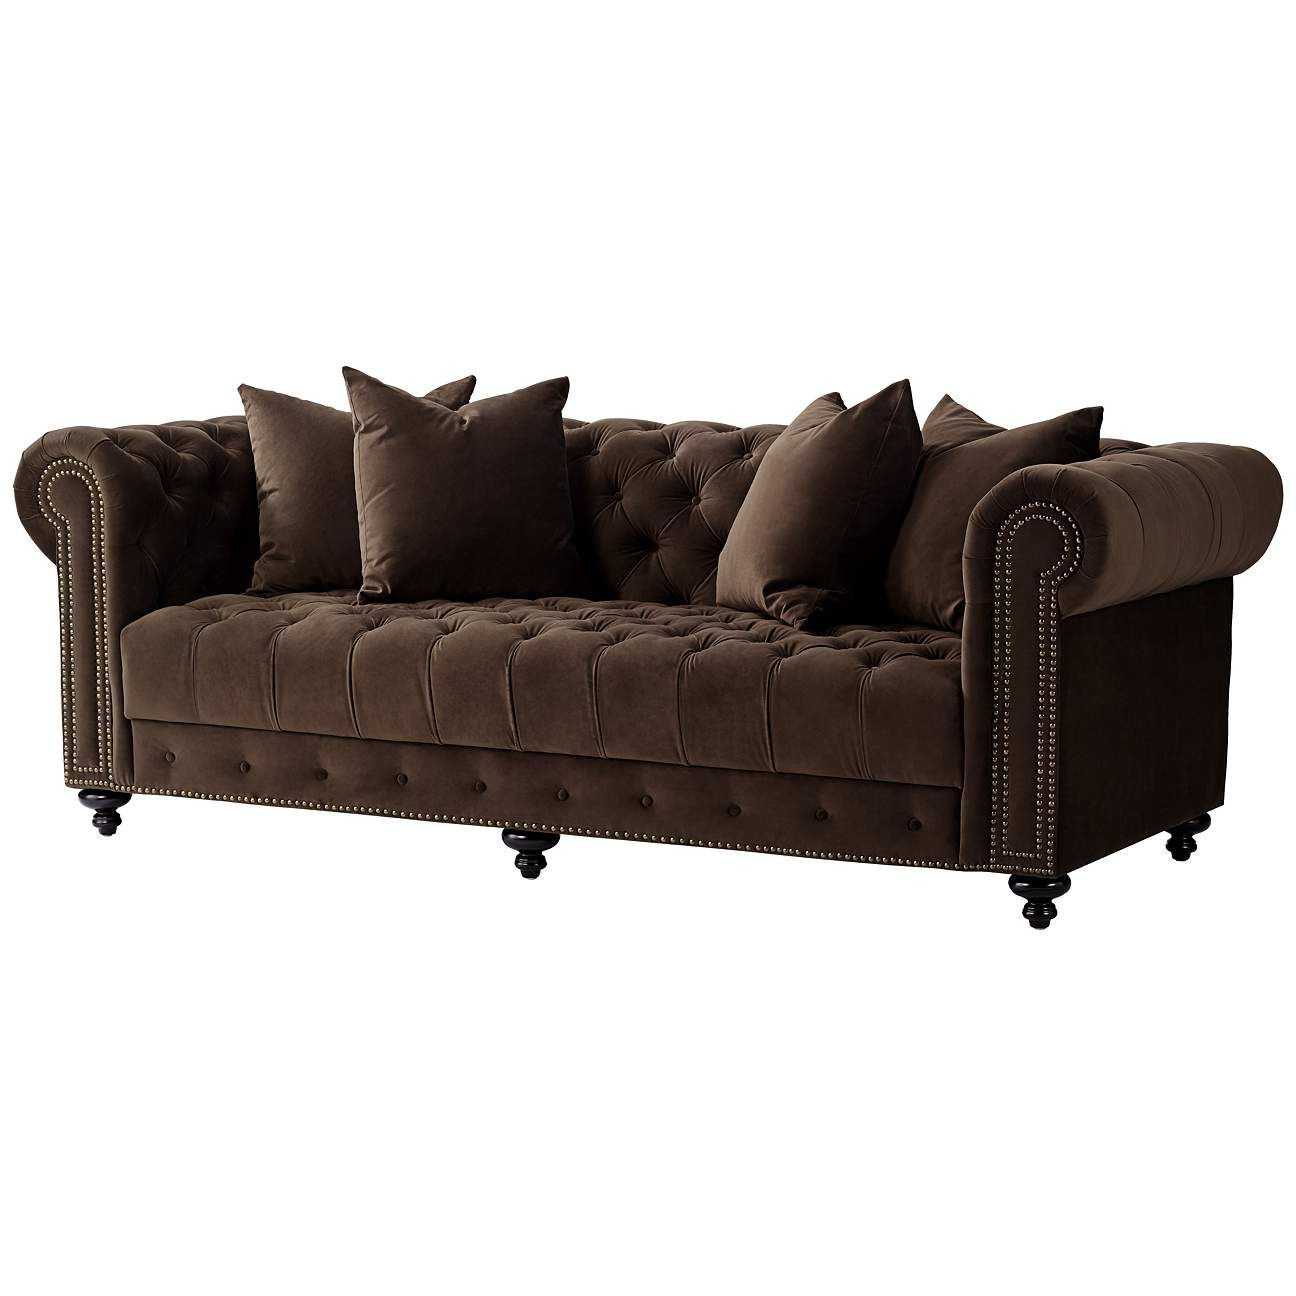 Jules 90"w Chocolate Brown Velvet Tufted Chesterfield Sofa – #58j03 Inside Sofas In Chocolate Brown (View 3 of 20)